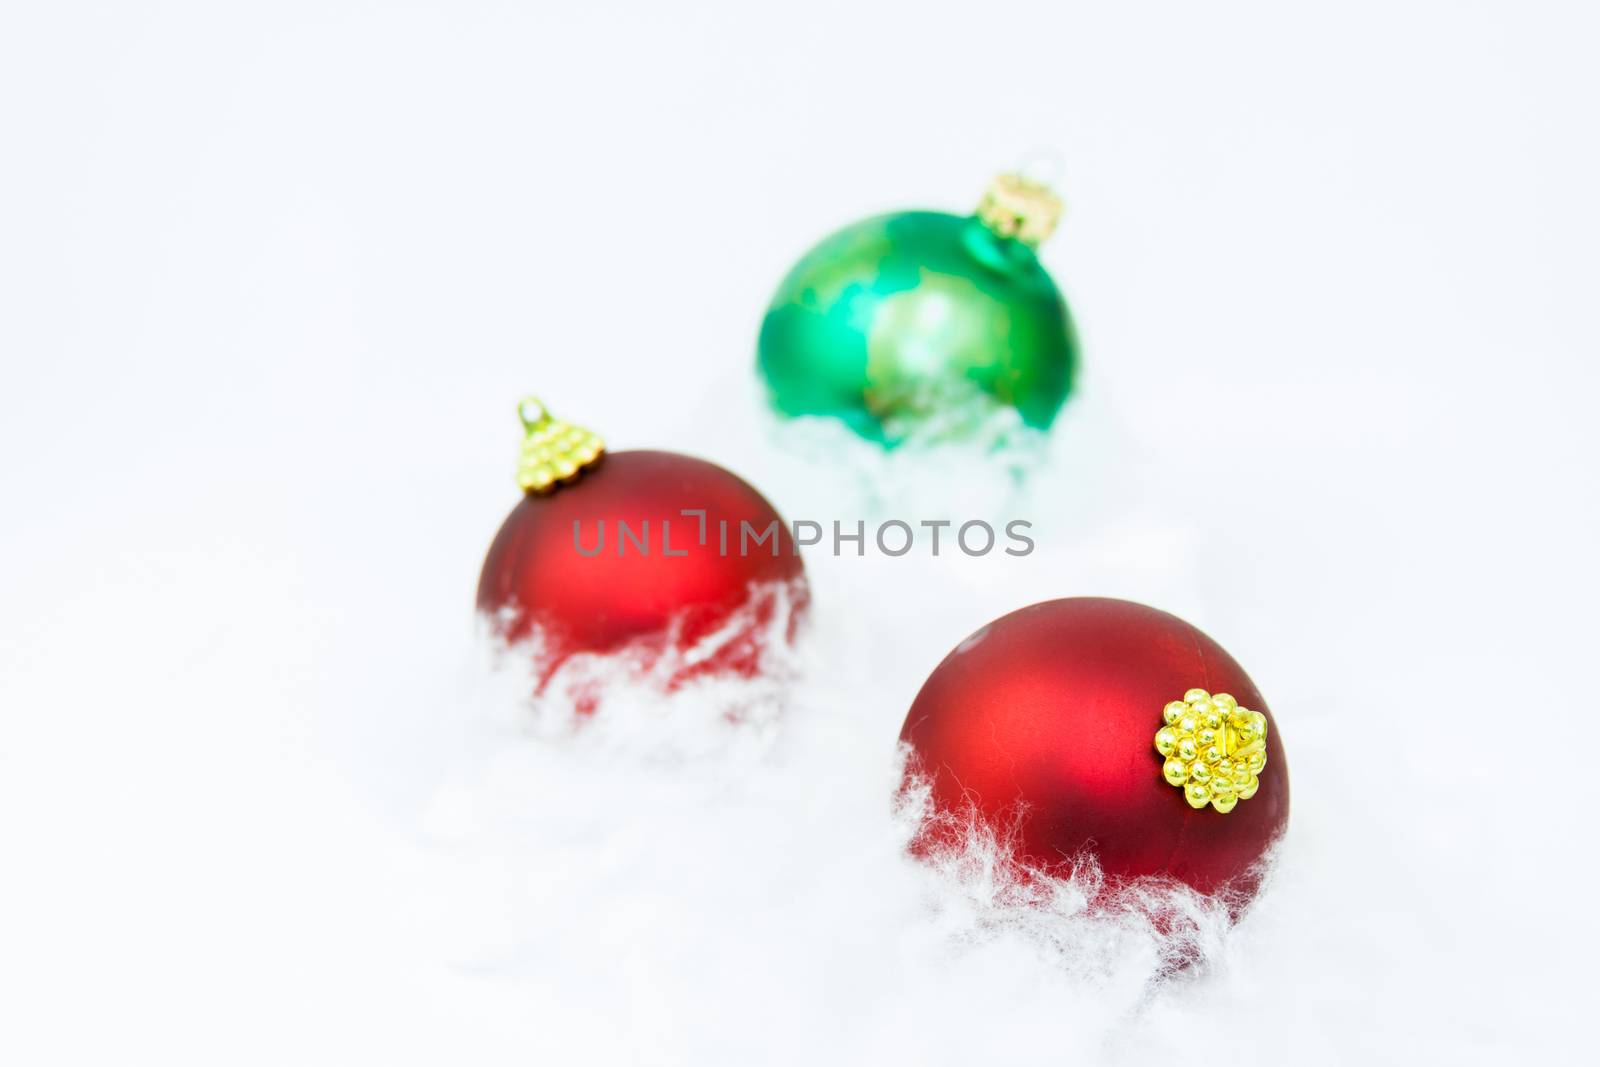 Isolated beautiful Christmas ornaments by Digoarpi